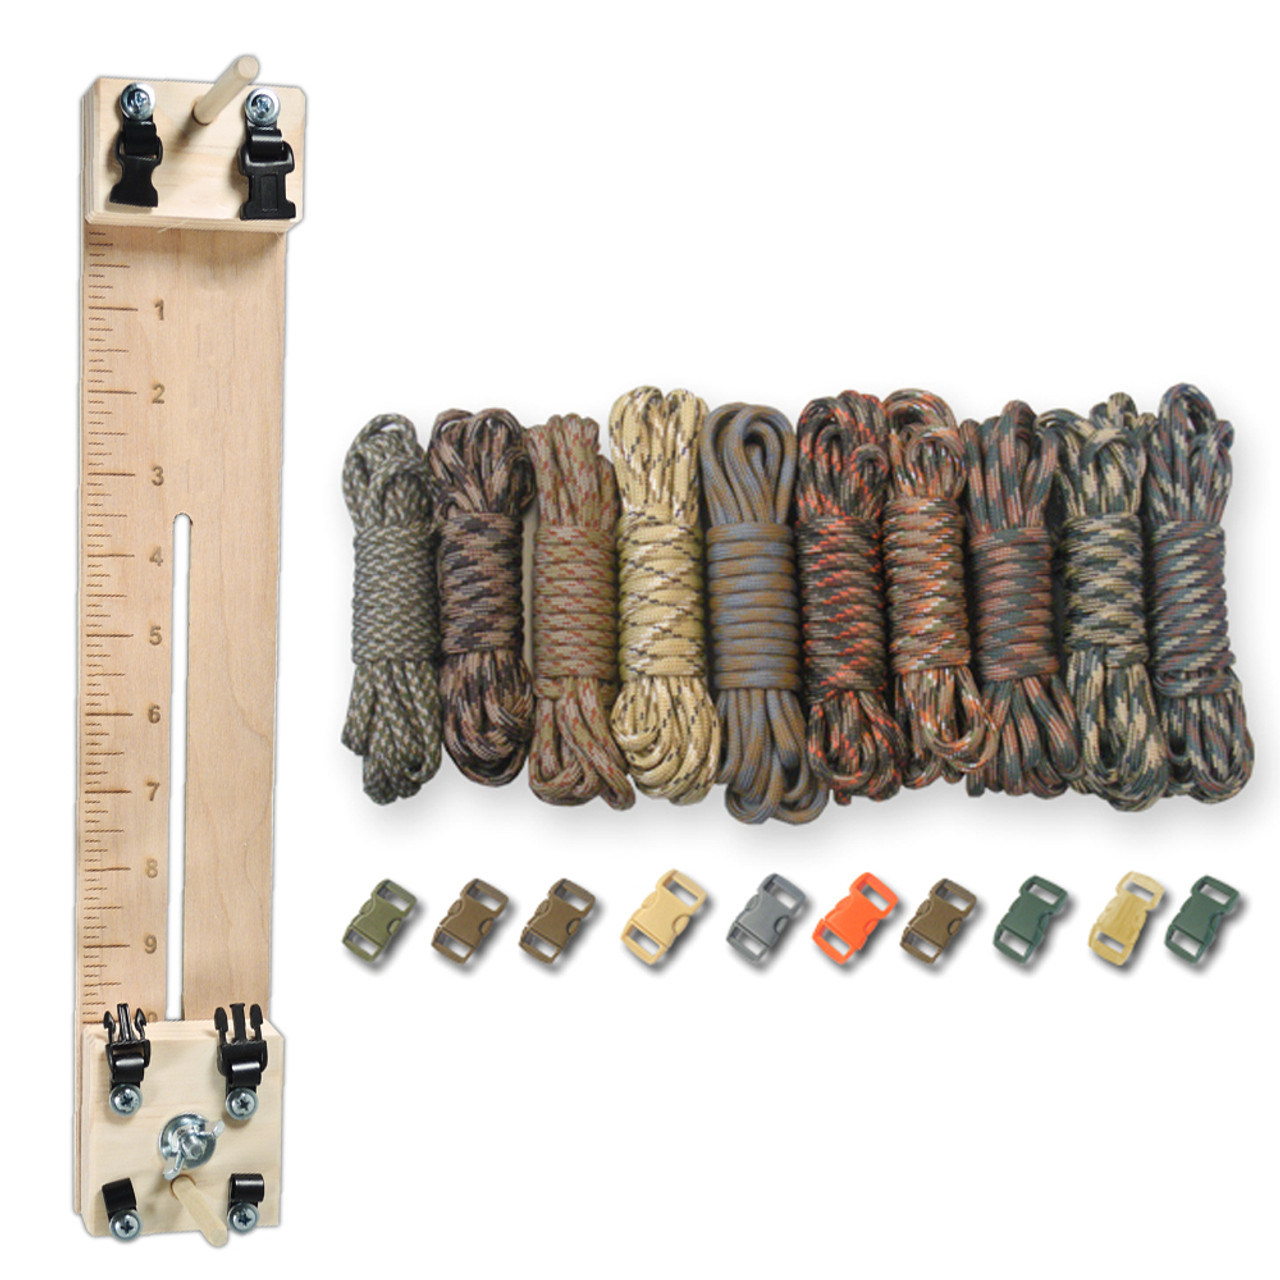 Craft County - Paracord Starter Kit - Multiple Color Combinations 